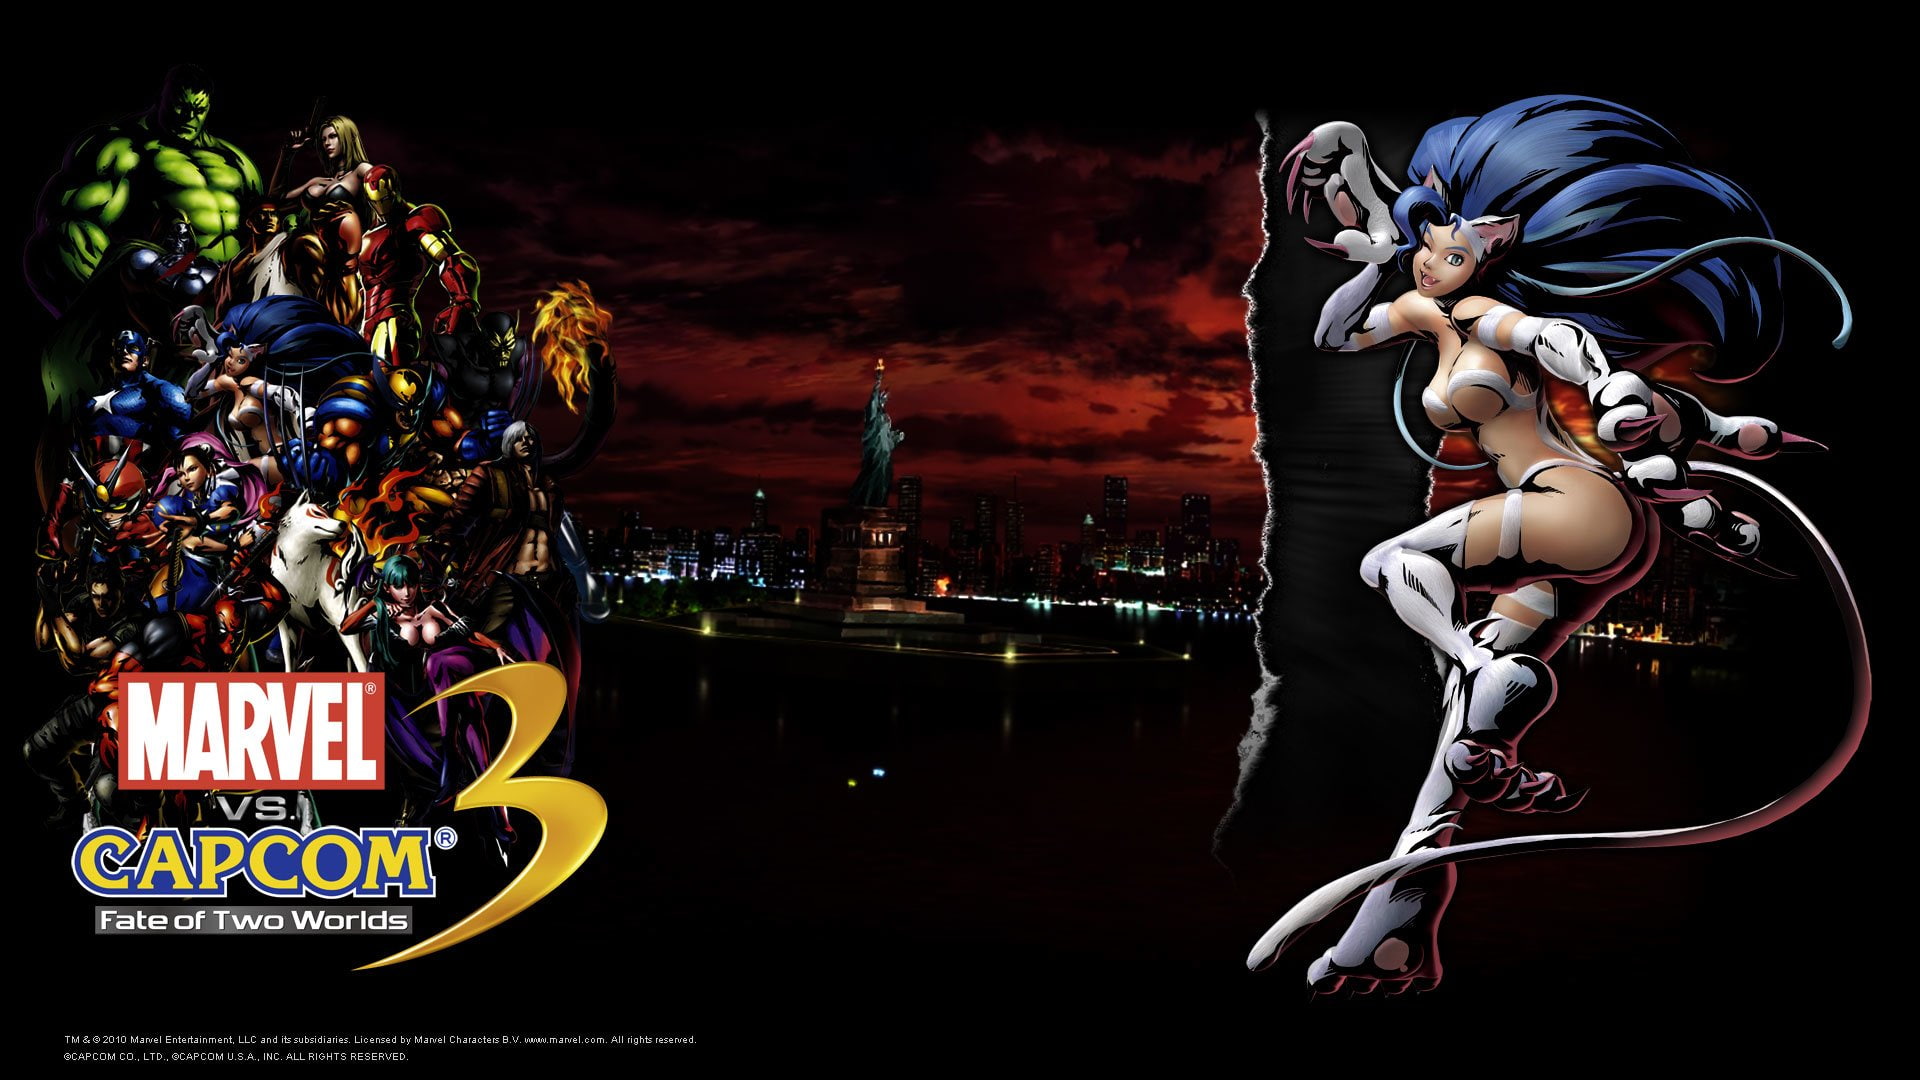 Video Game, Marvel vs. Capcom 3: Fate of Two Worlds